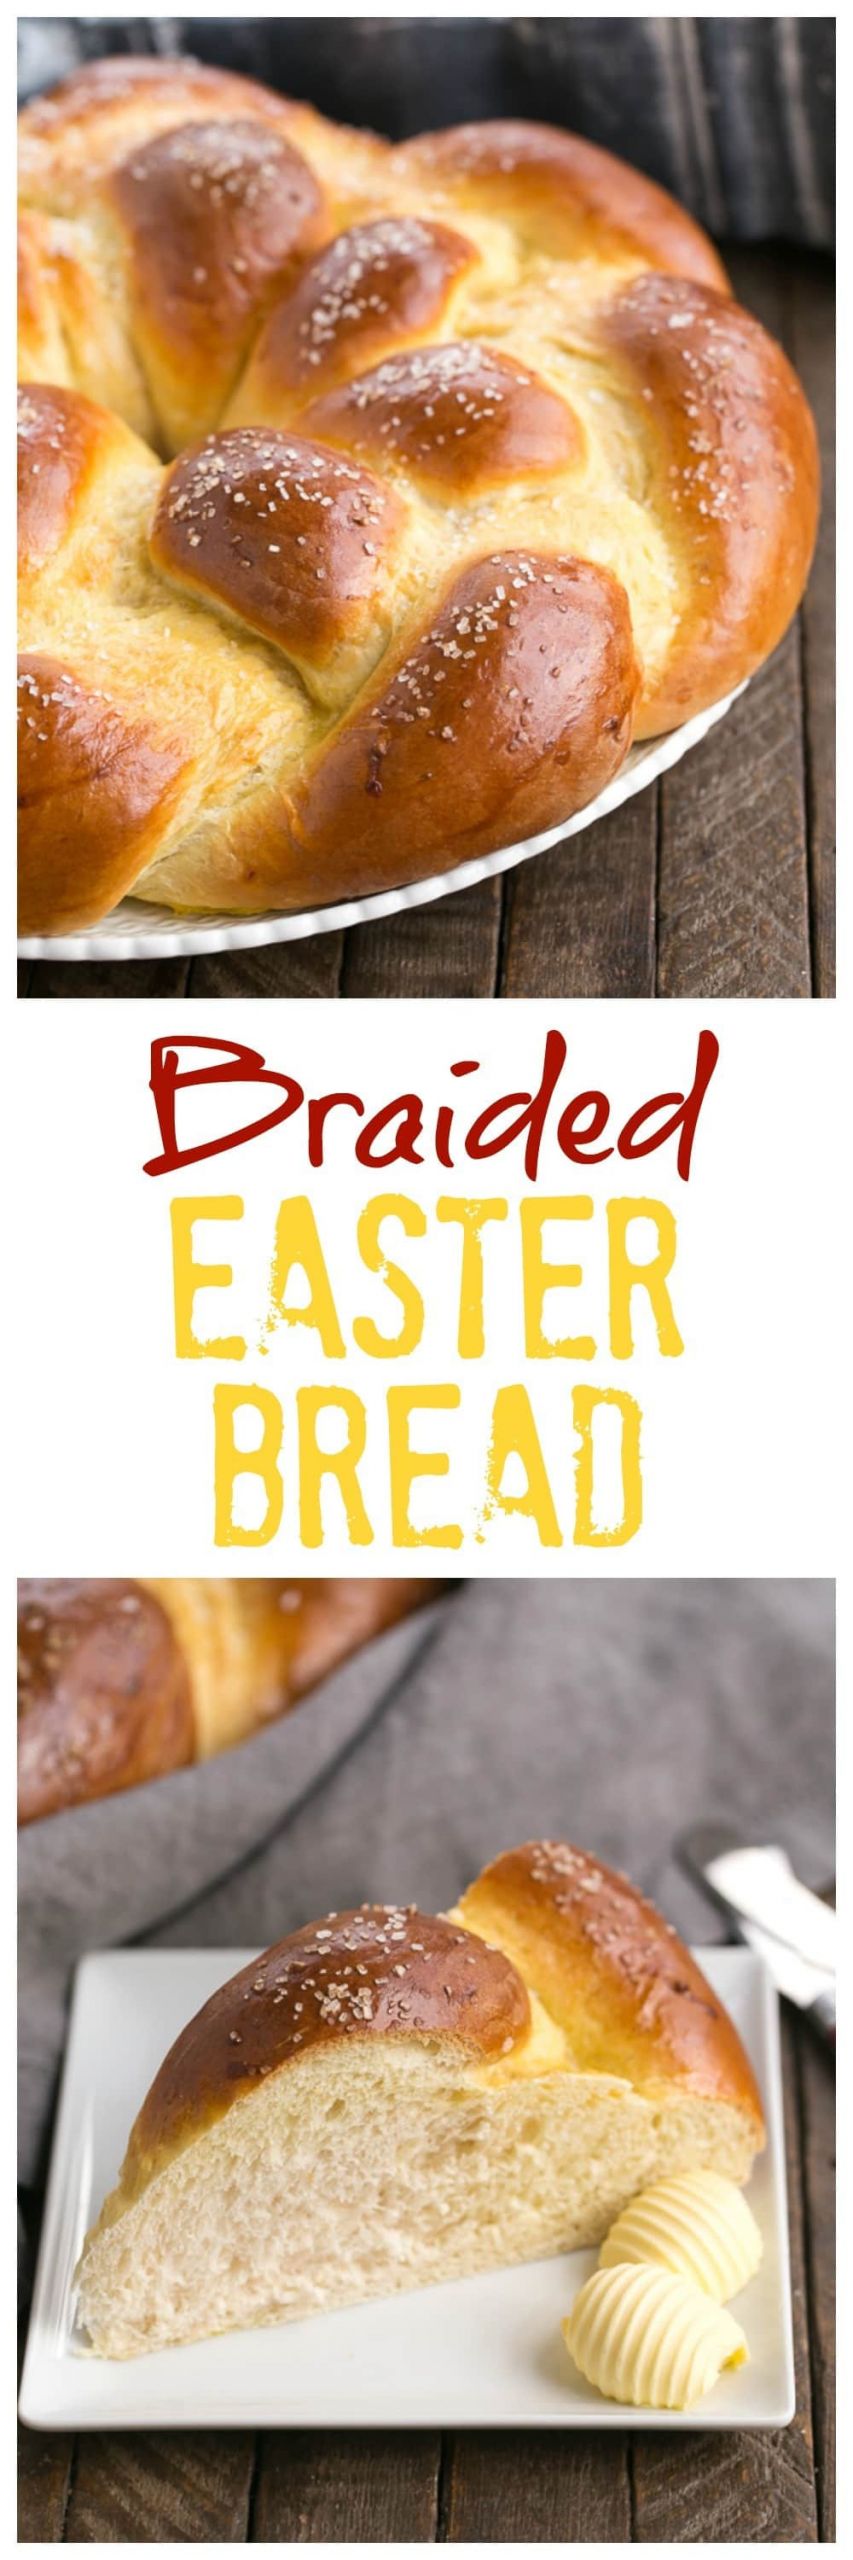 Easter Bread Recipes
 Braided Easter Bread Recipe That Skinny Chick Can Bake